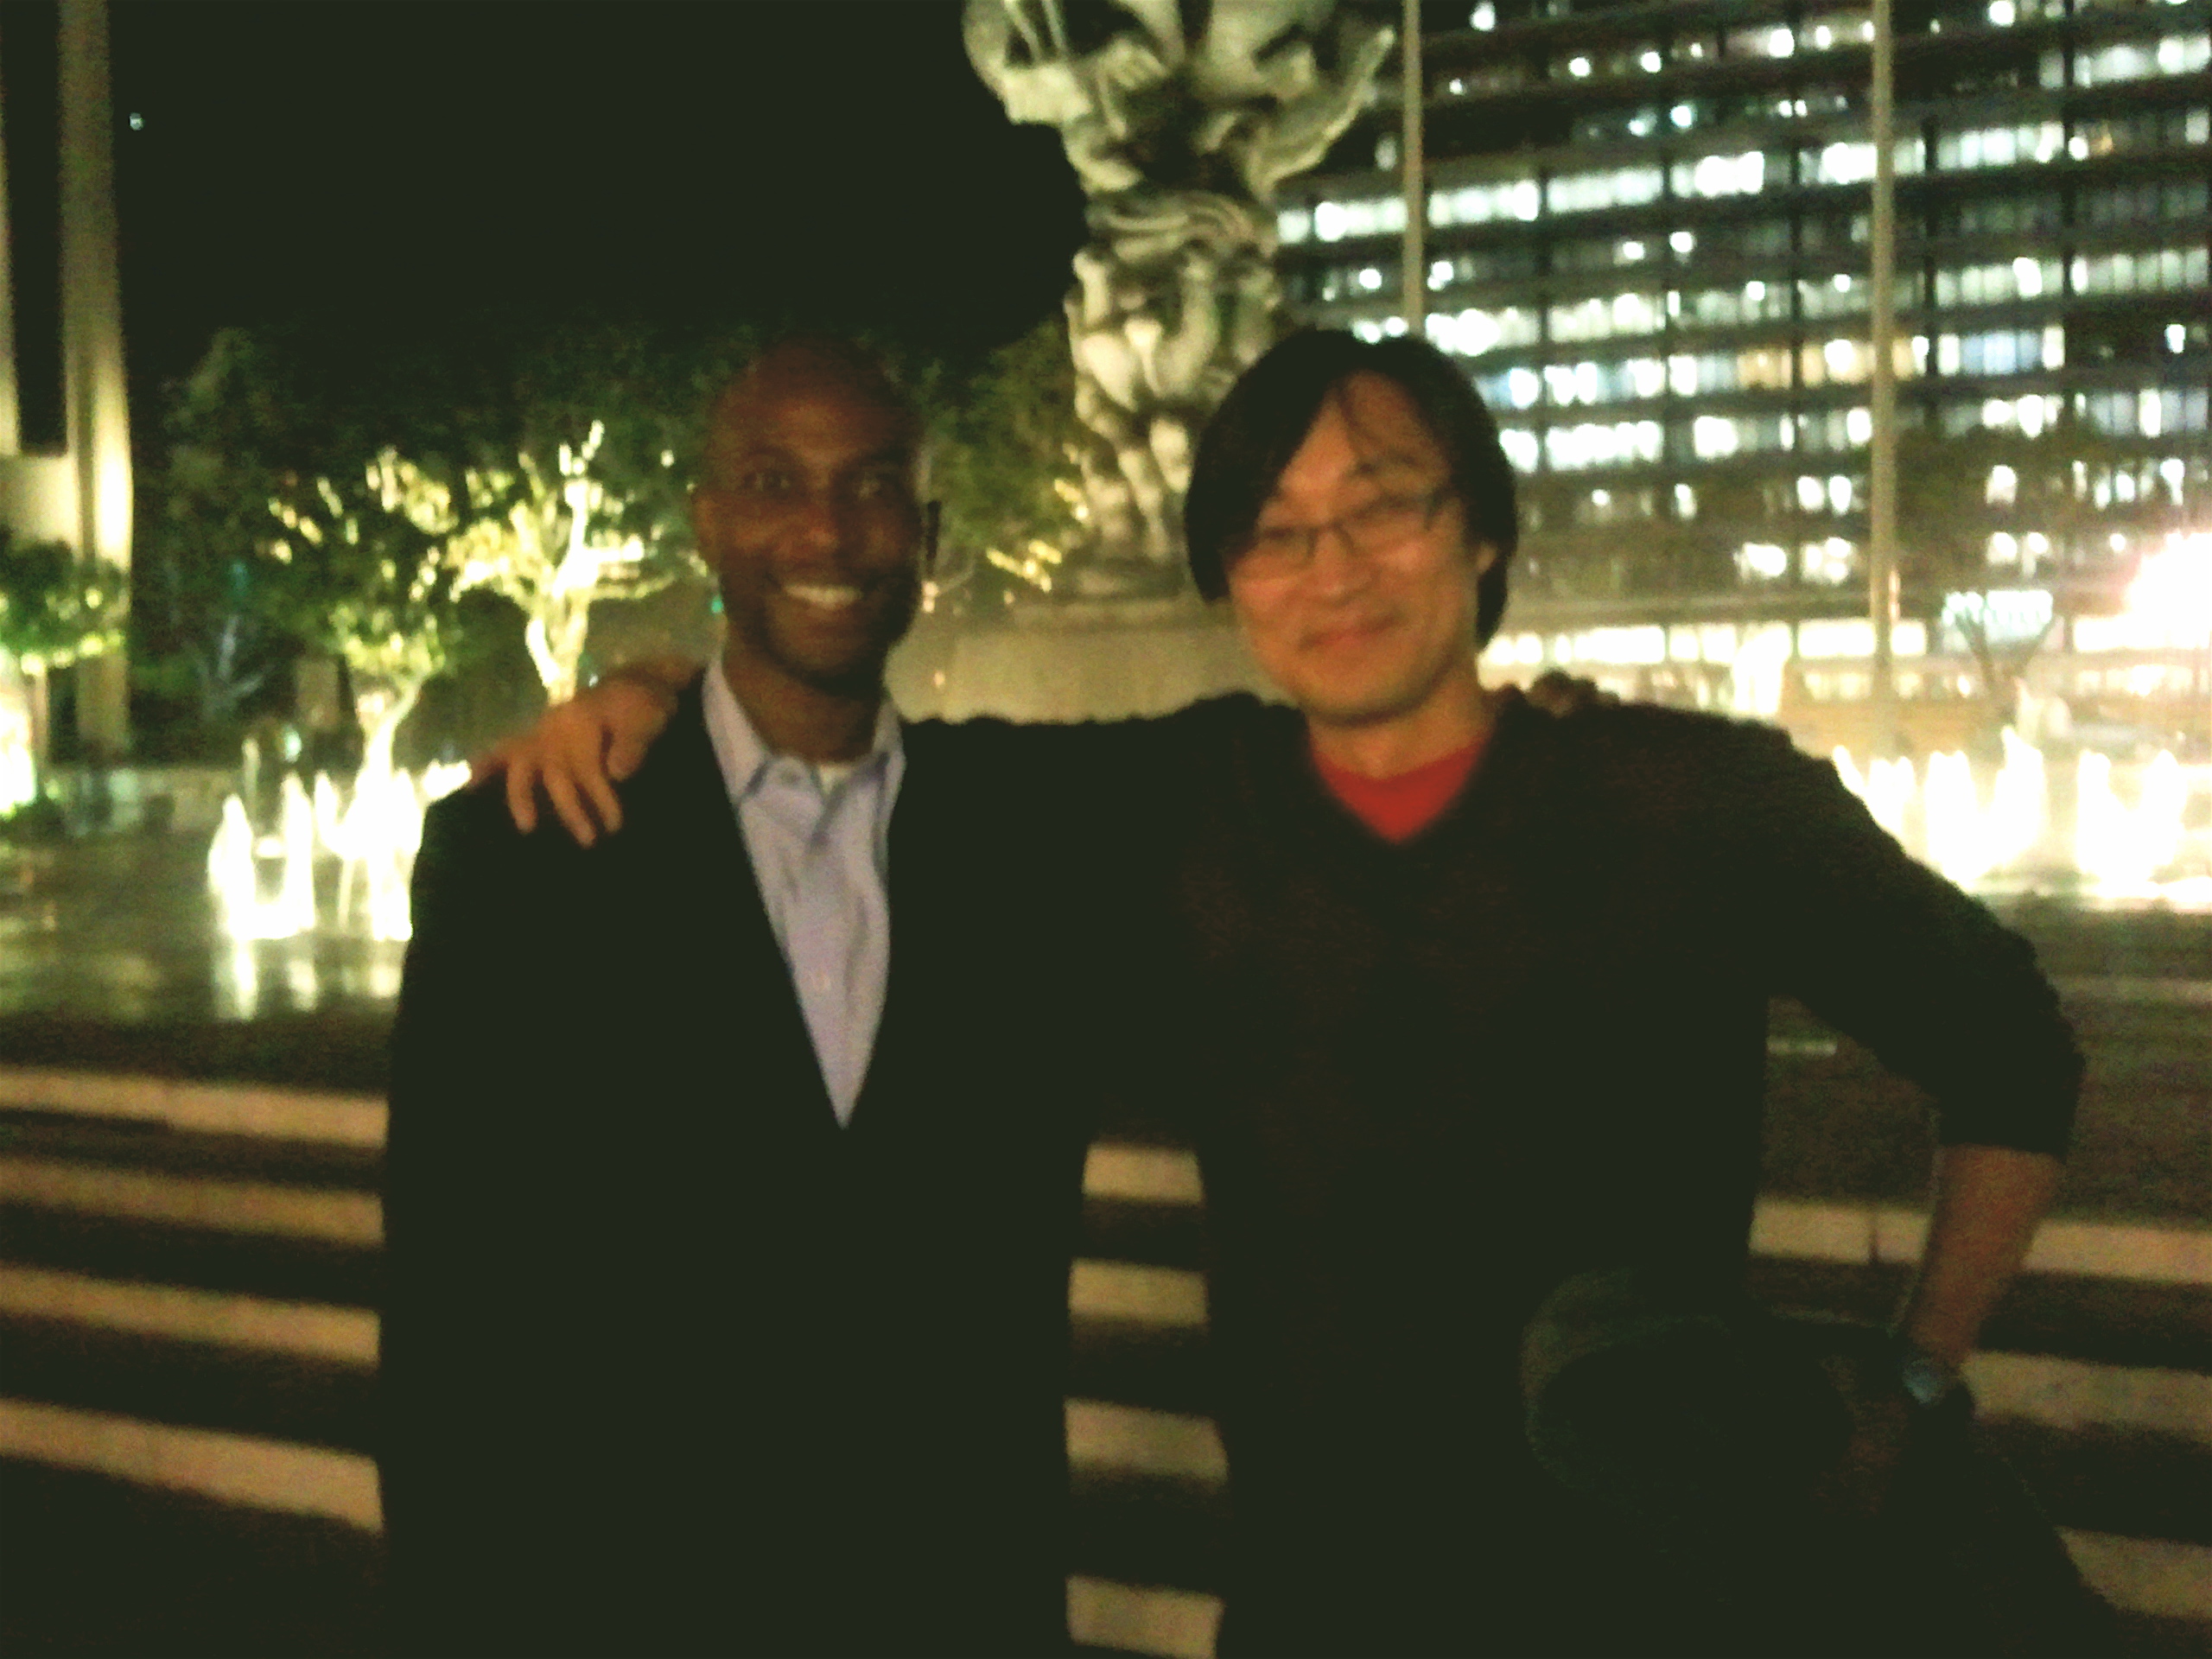 Gregory and friend actor Keong Sim attending a performance at The Mark Taper Forum 2012.